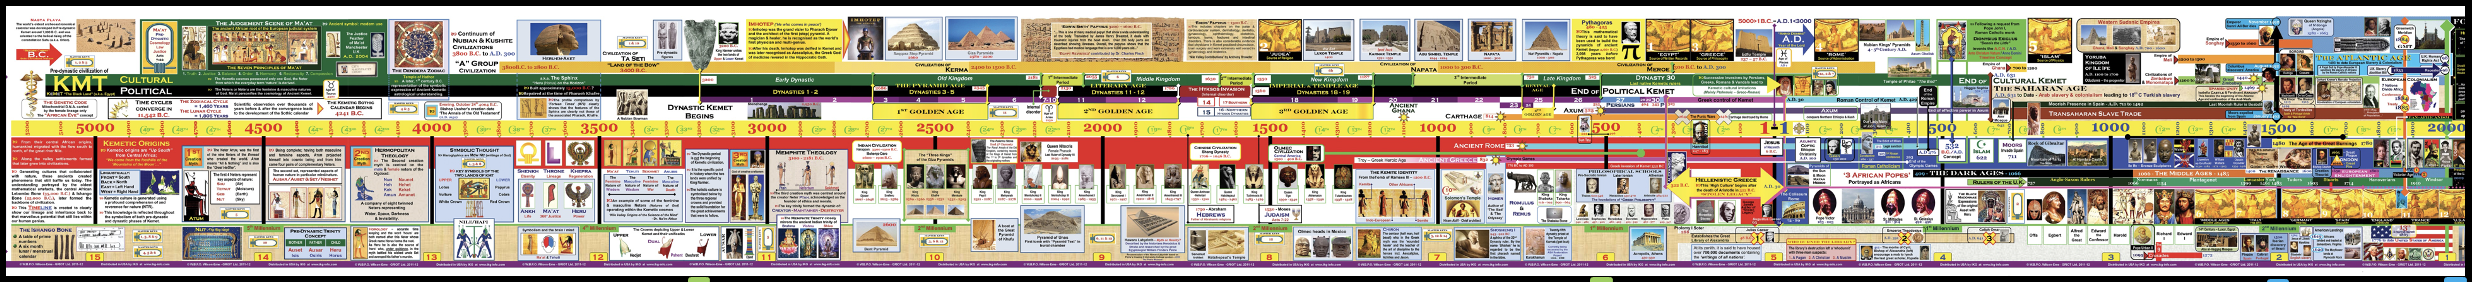 world history timeline 1500 to present